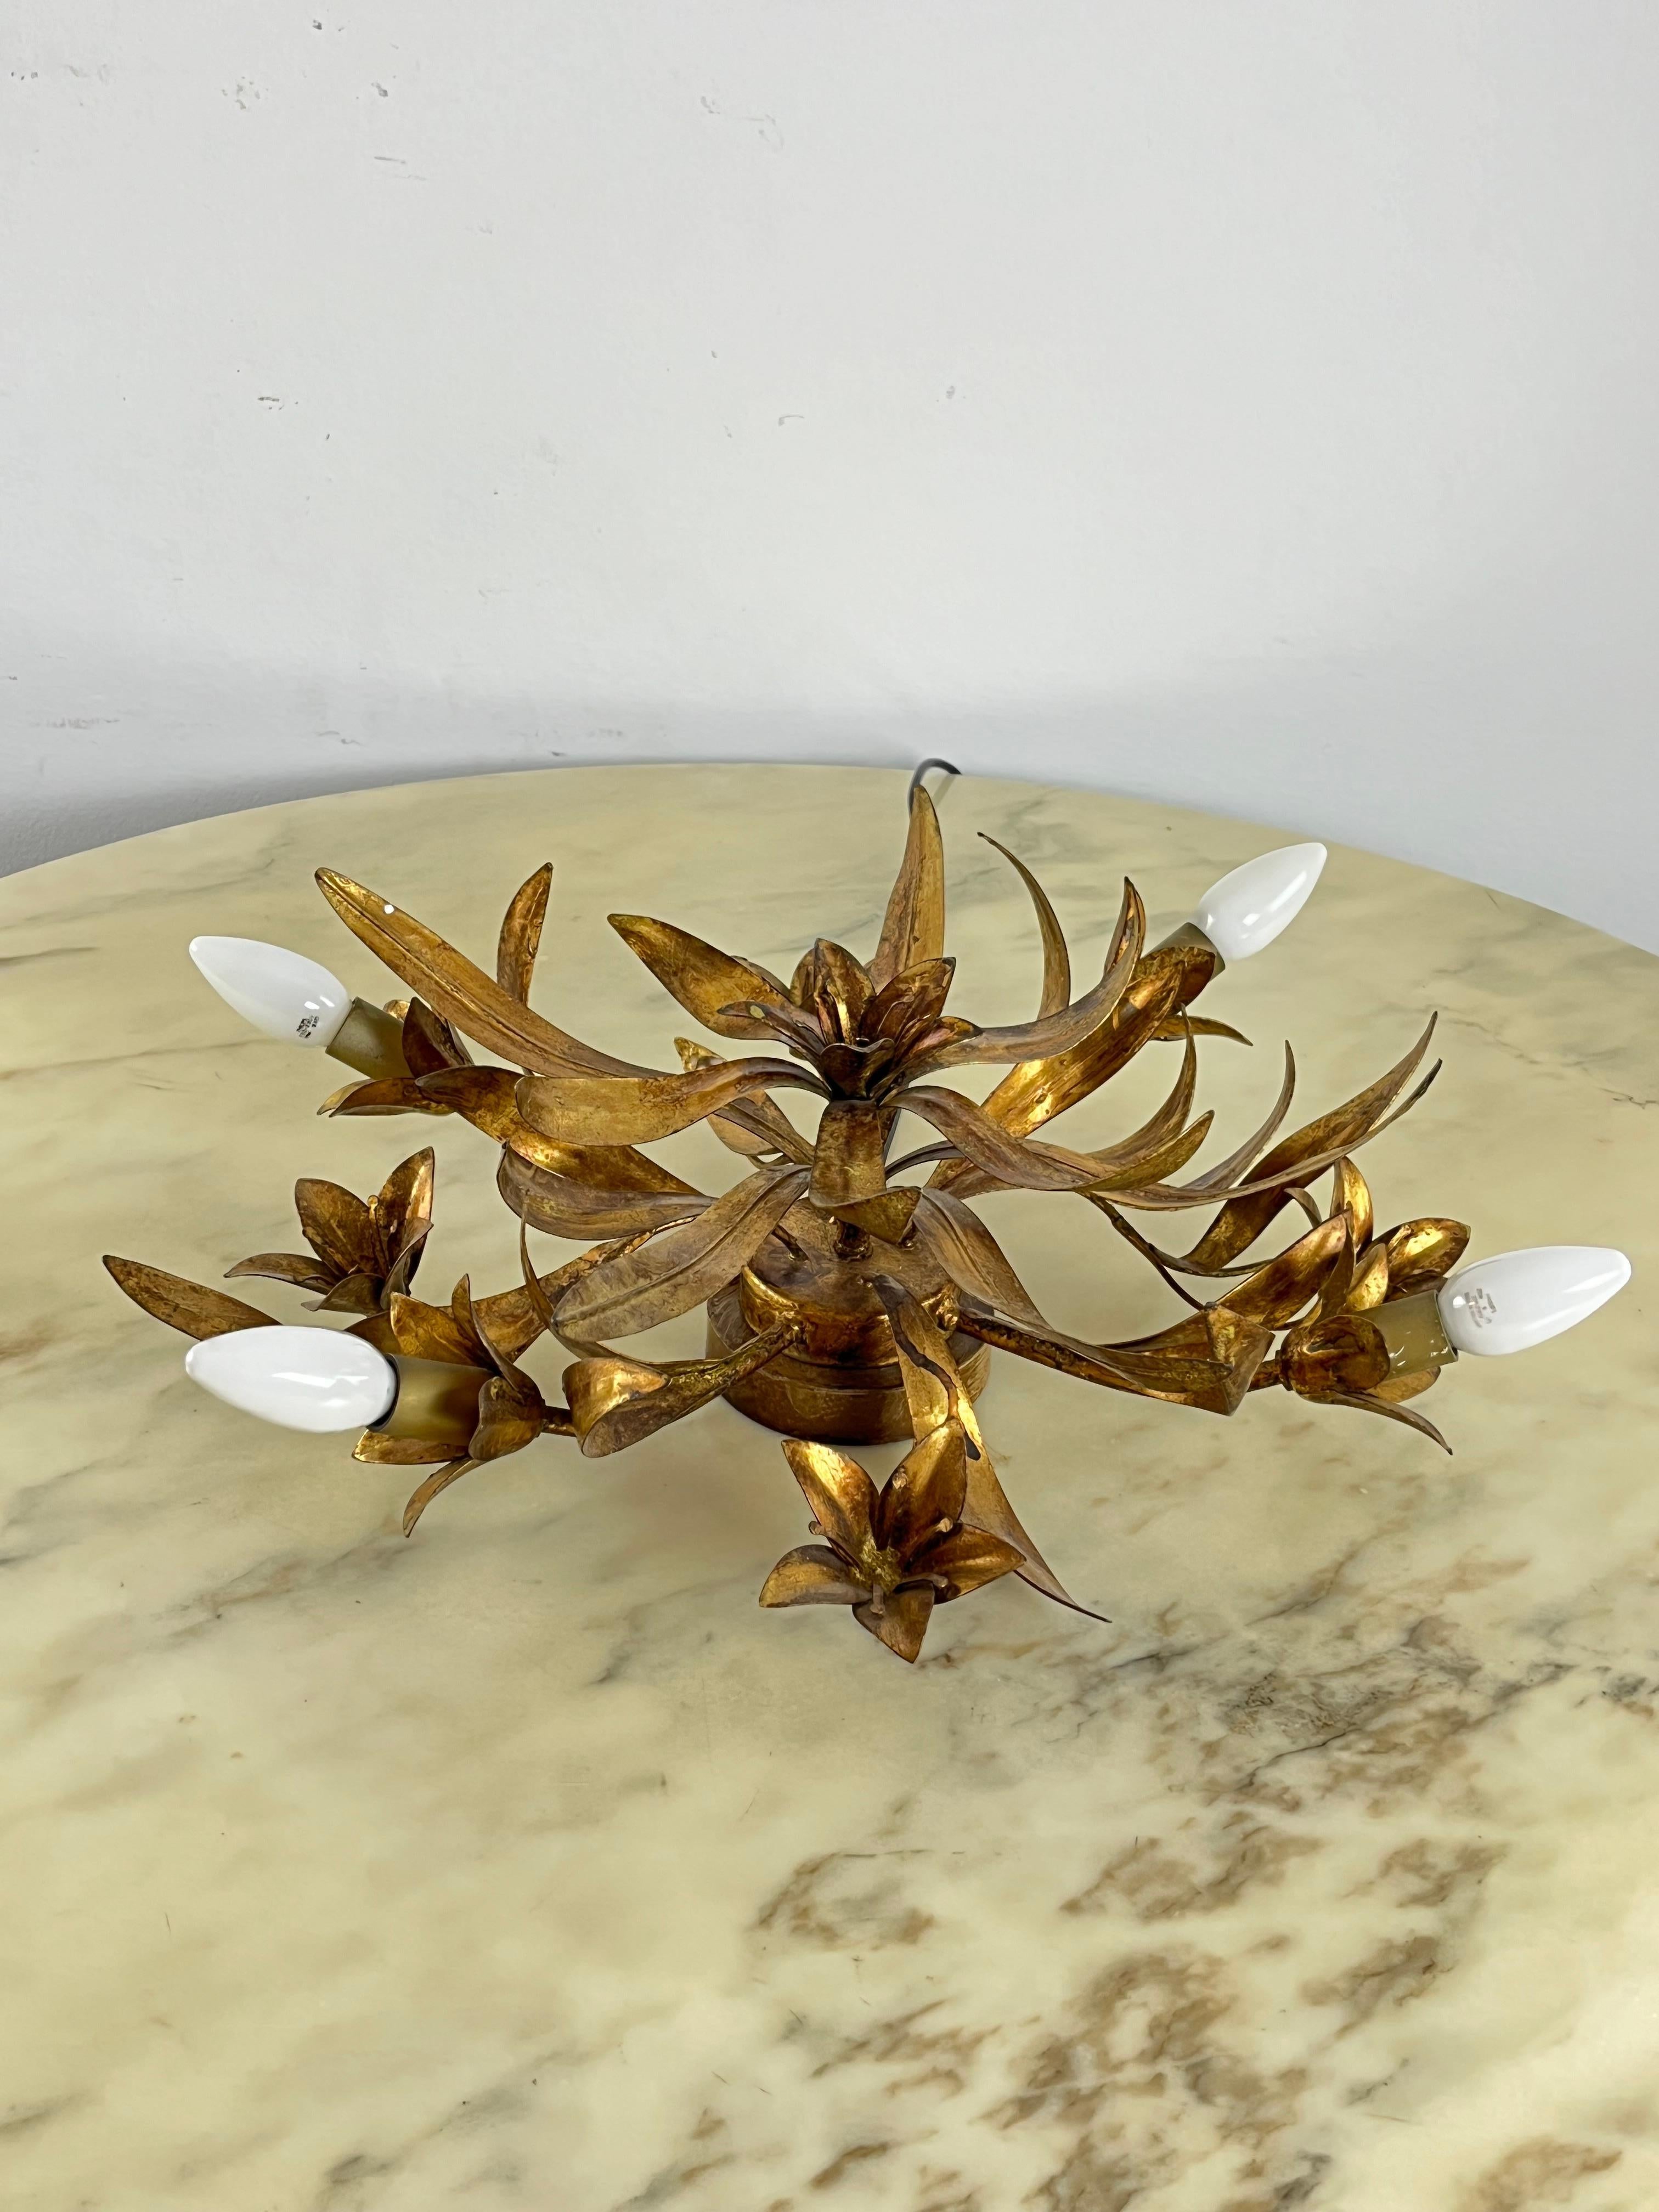 Florentine 5-light golden iron ceiling light  with flowers and leaves  1980s
In the style of Banci Firenze.
Intact and functional, small signs of aging. E14 lamps.